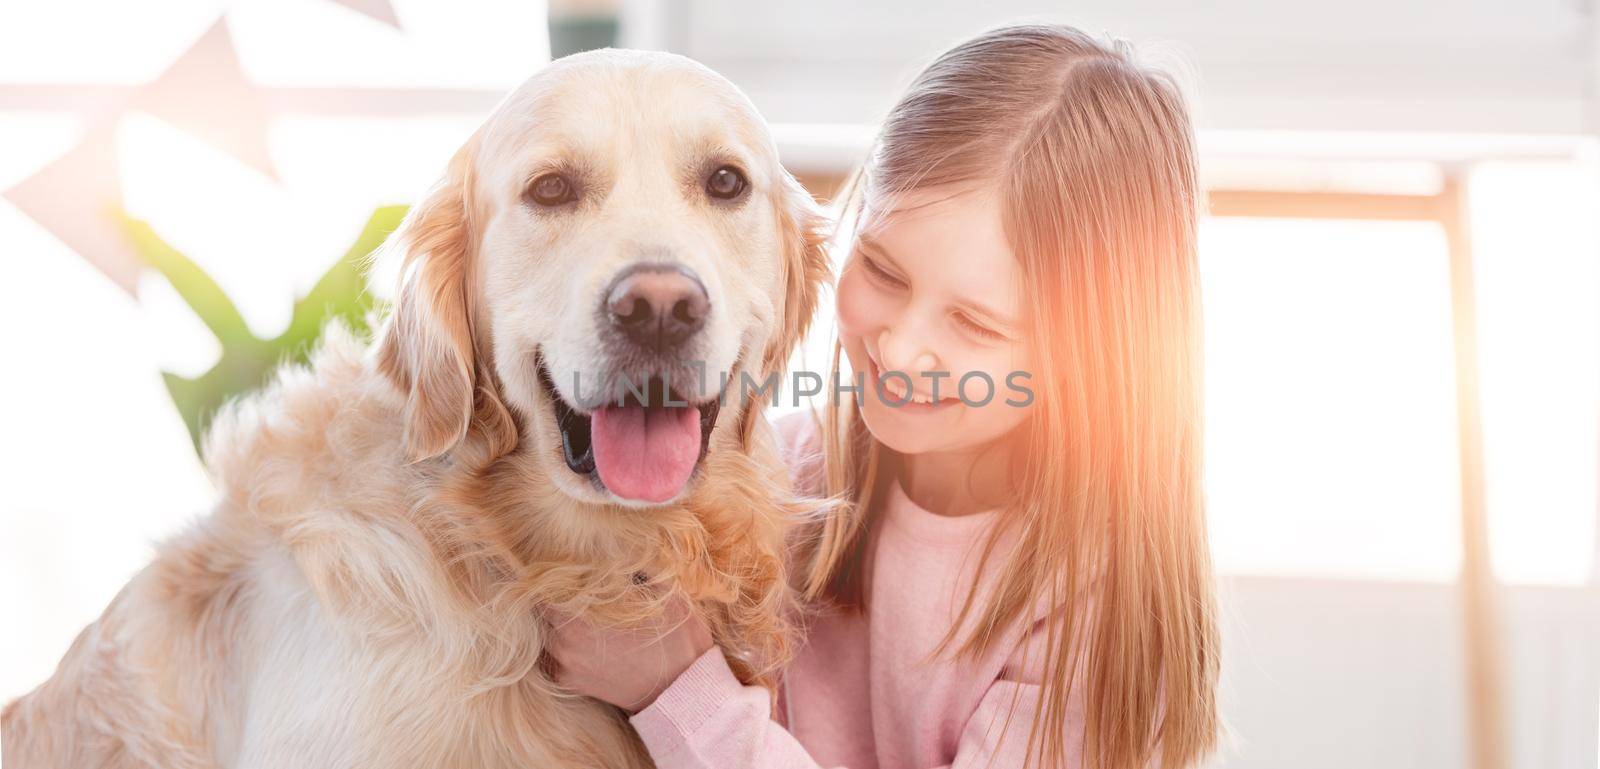 Little beautiful girl petting adorable golden retriever dog in the sunny room at home